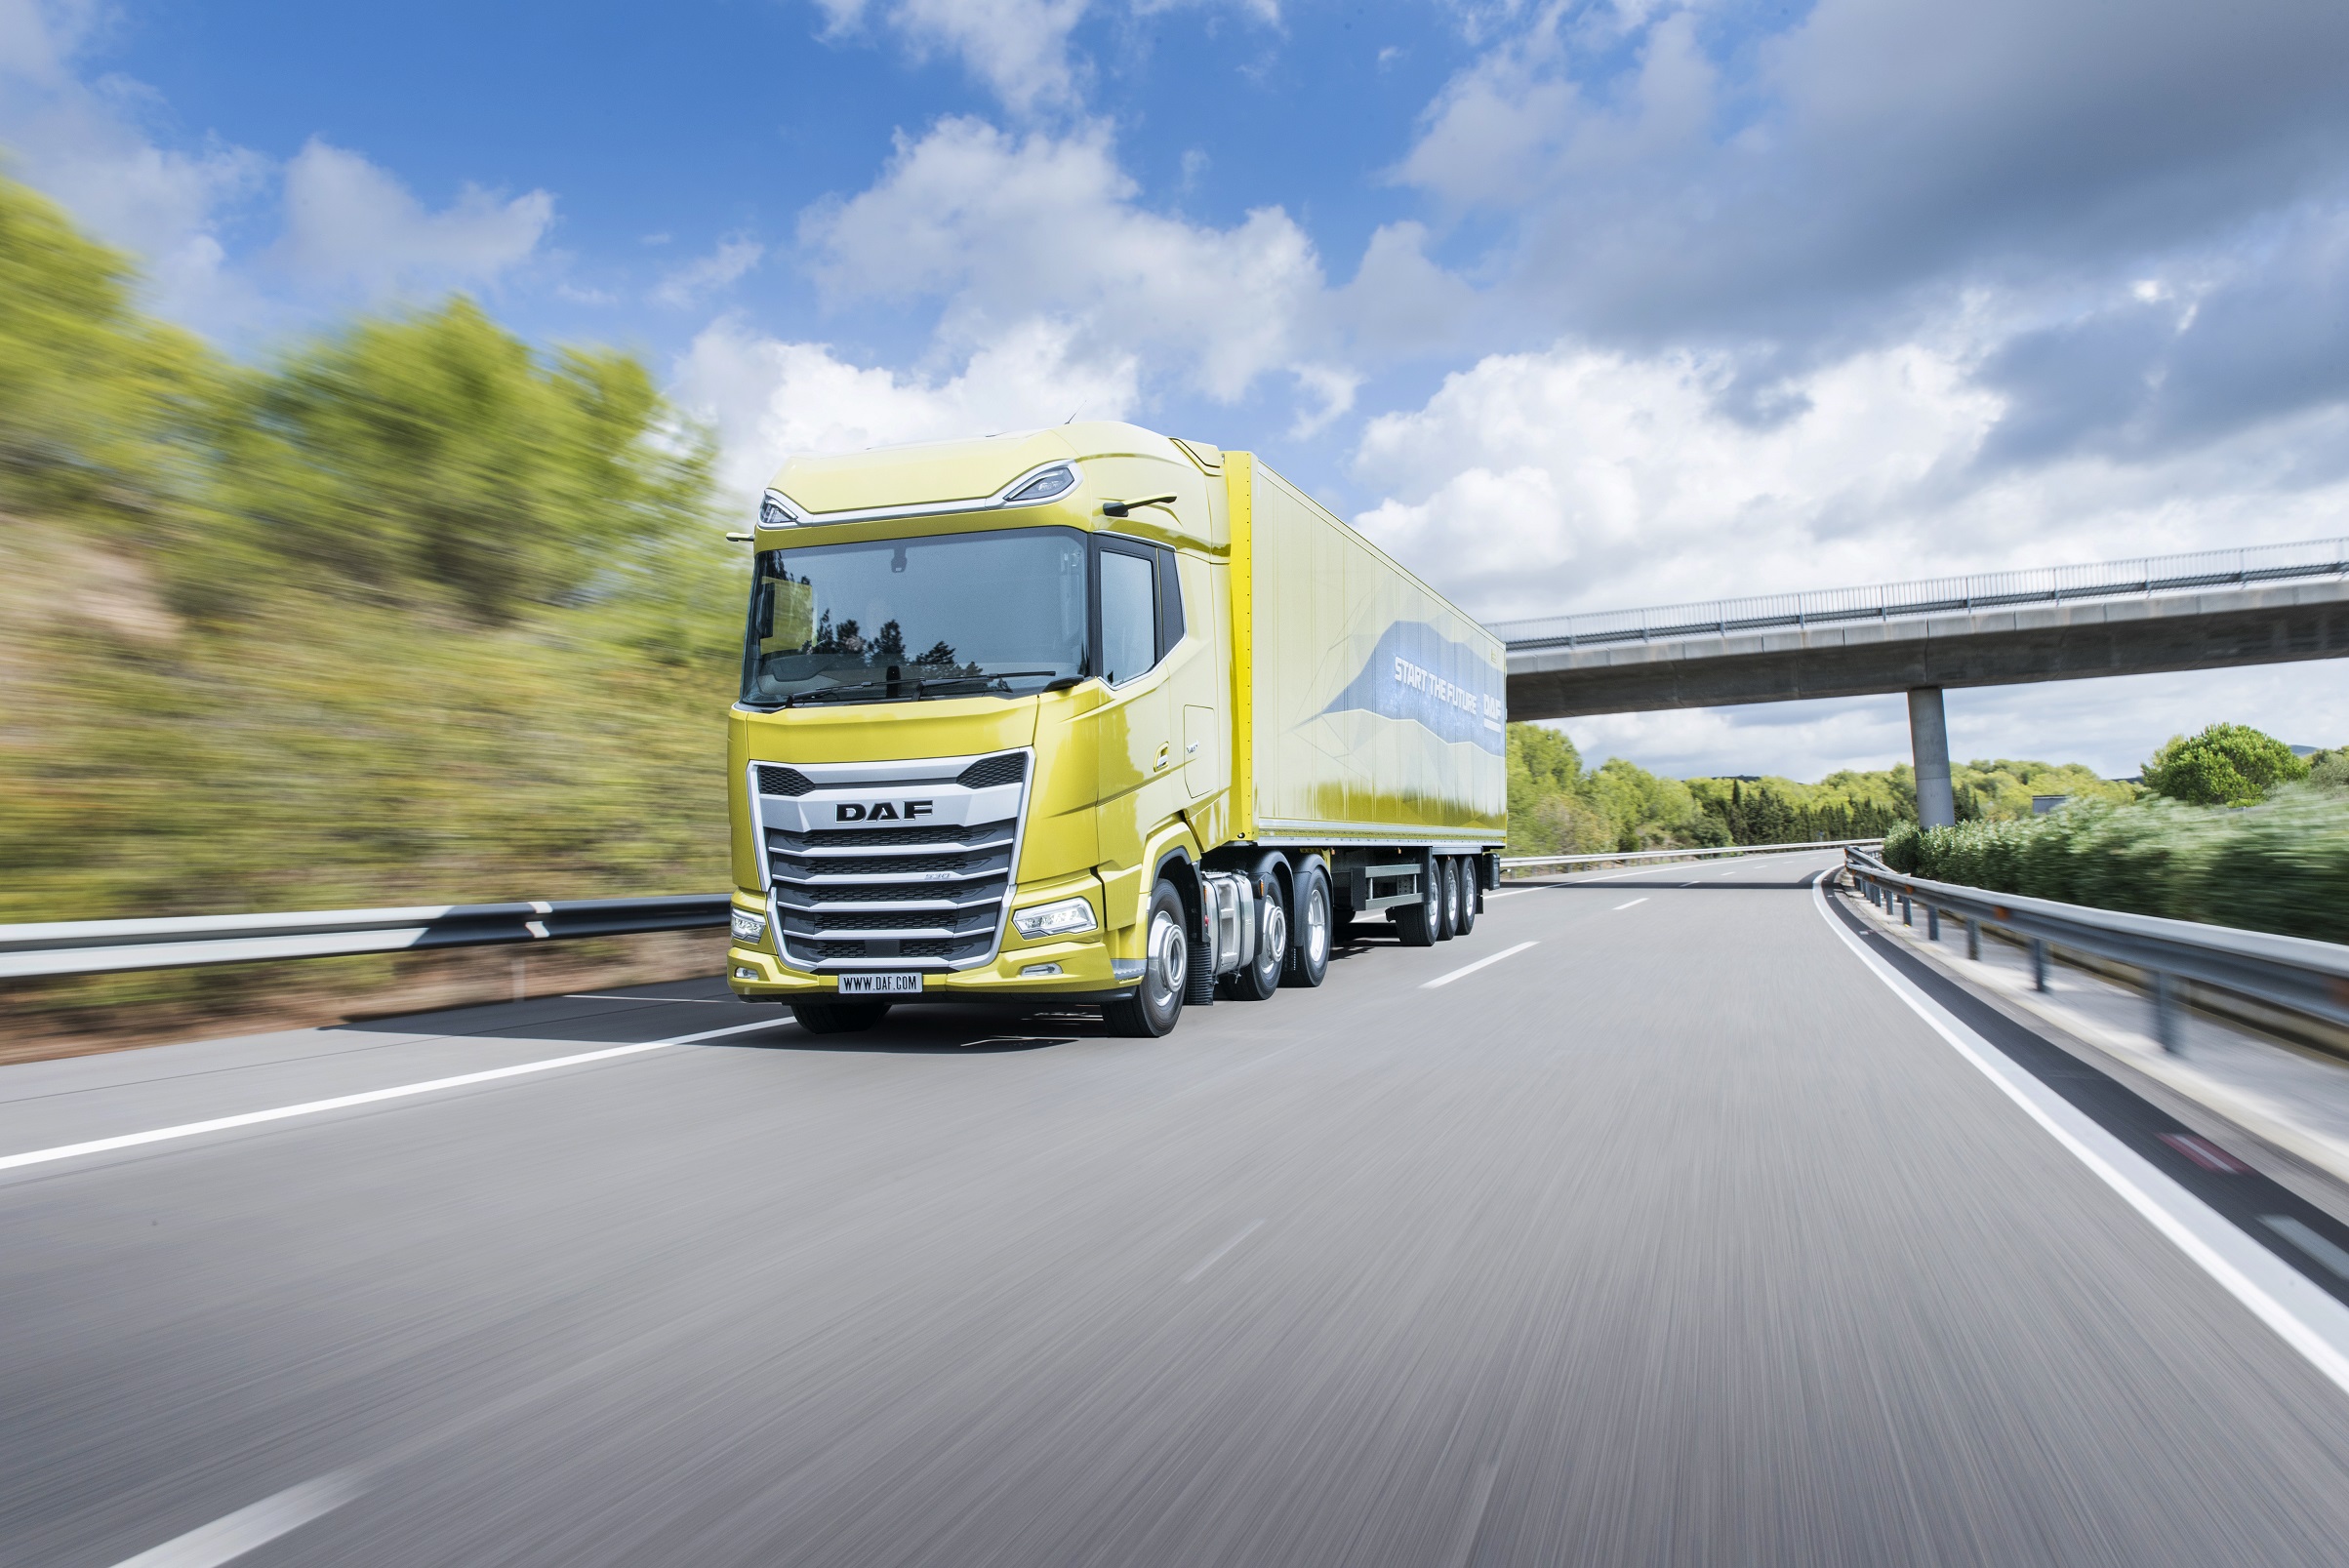 2 04. The New Generation DAF XG truck is expecially designed for the long haul